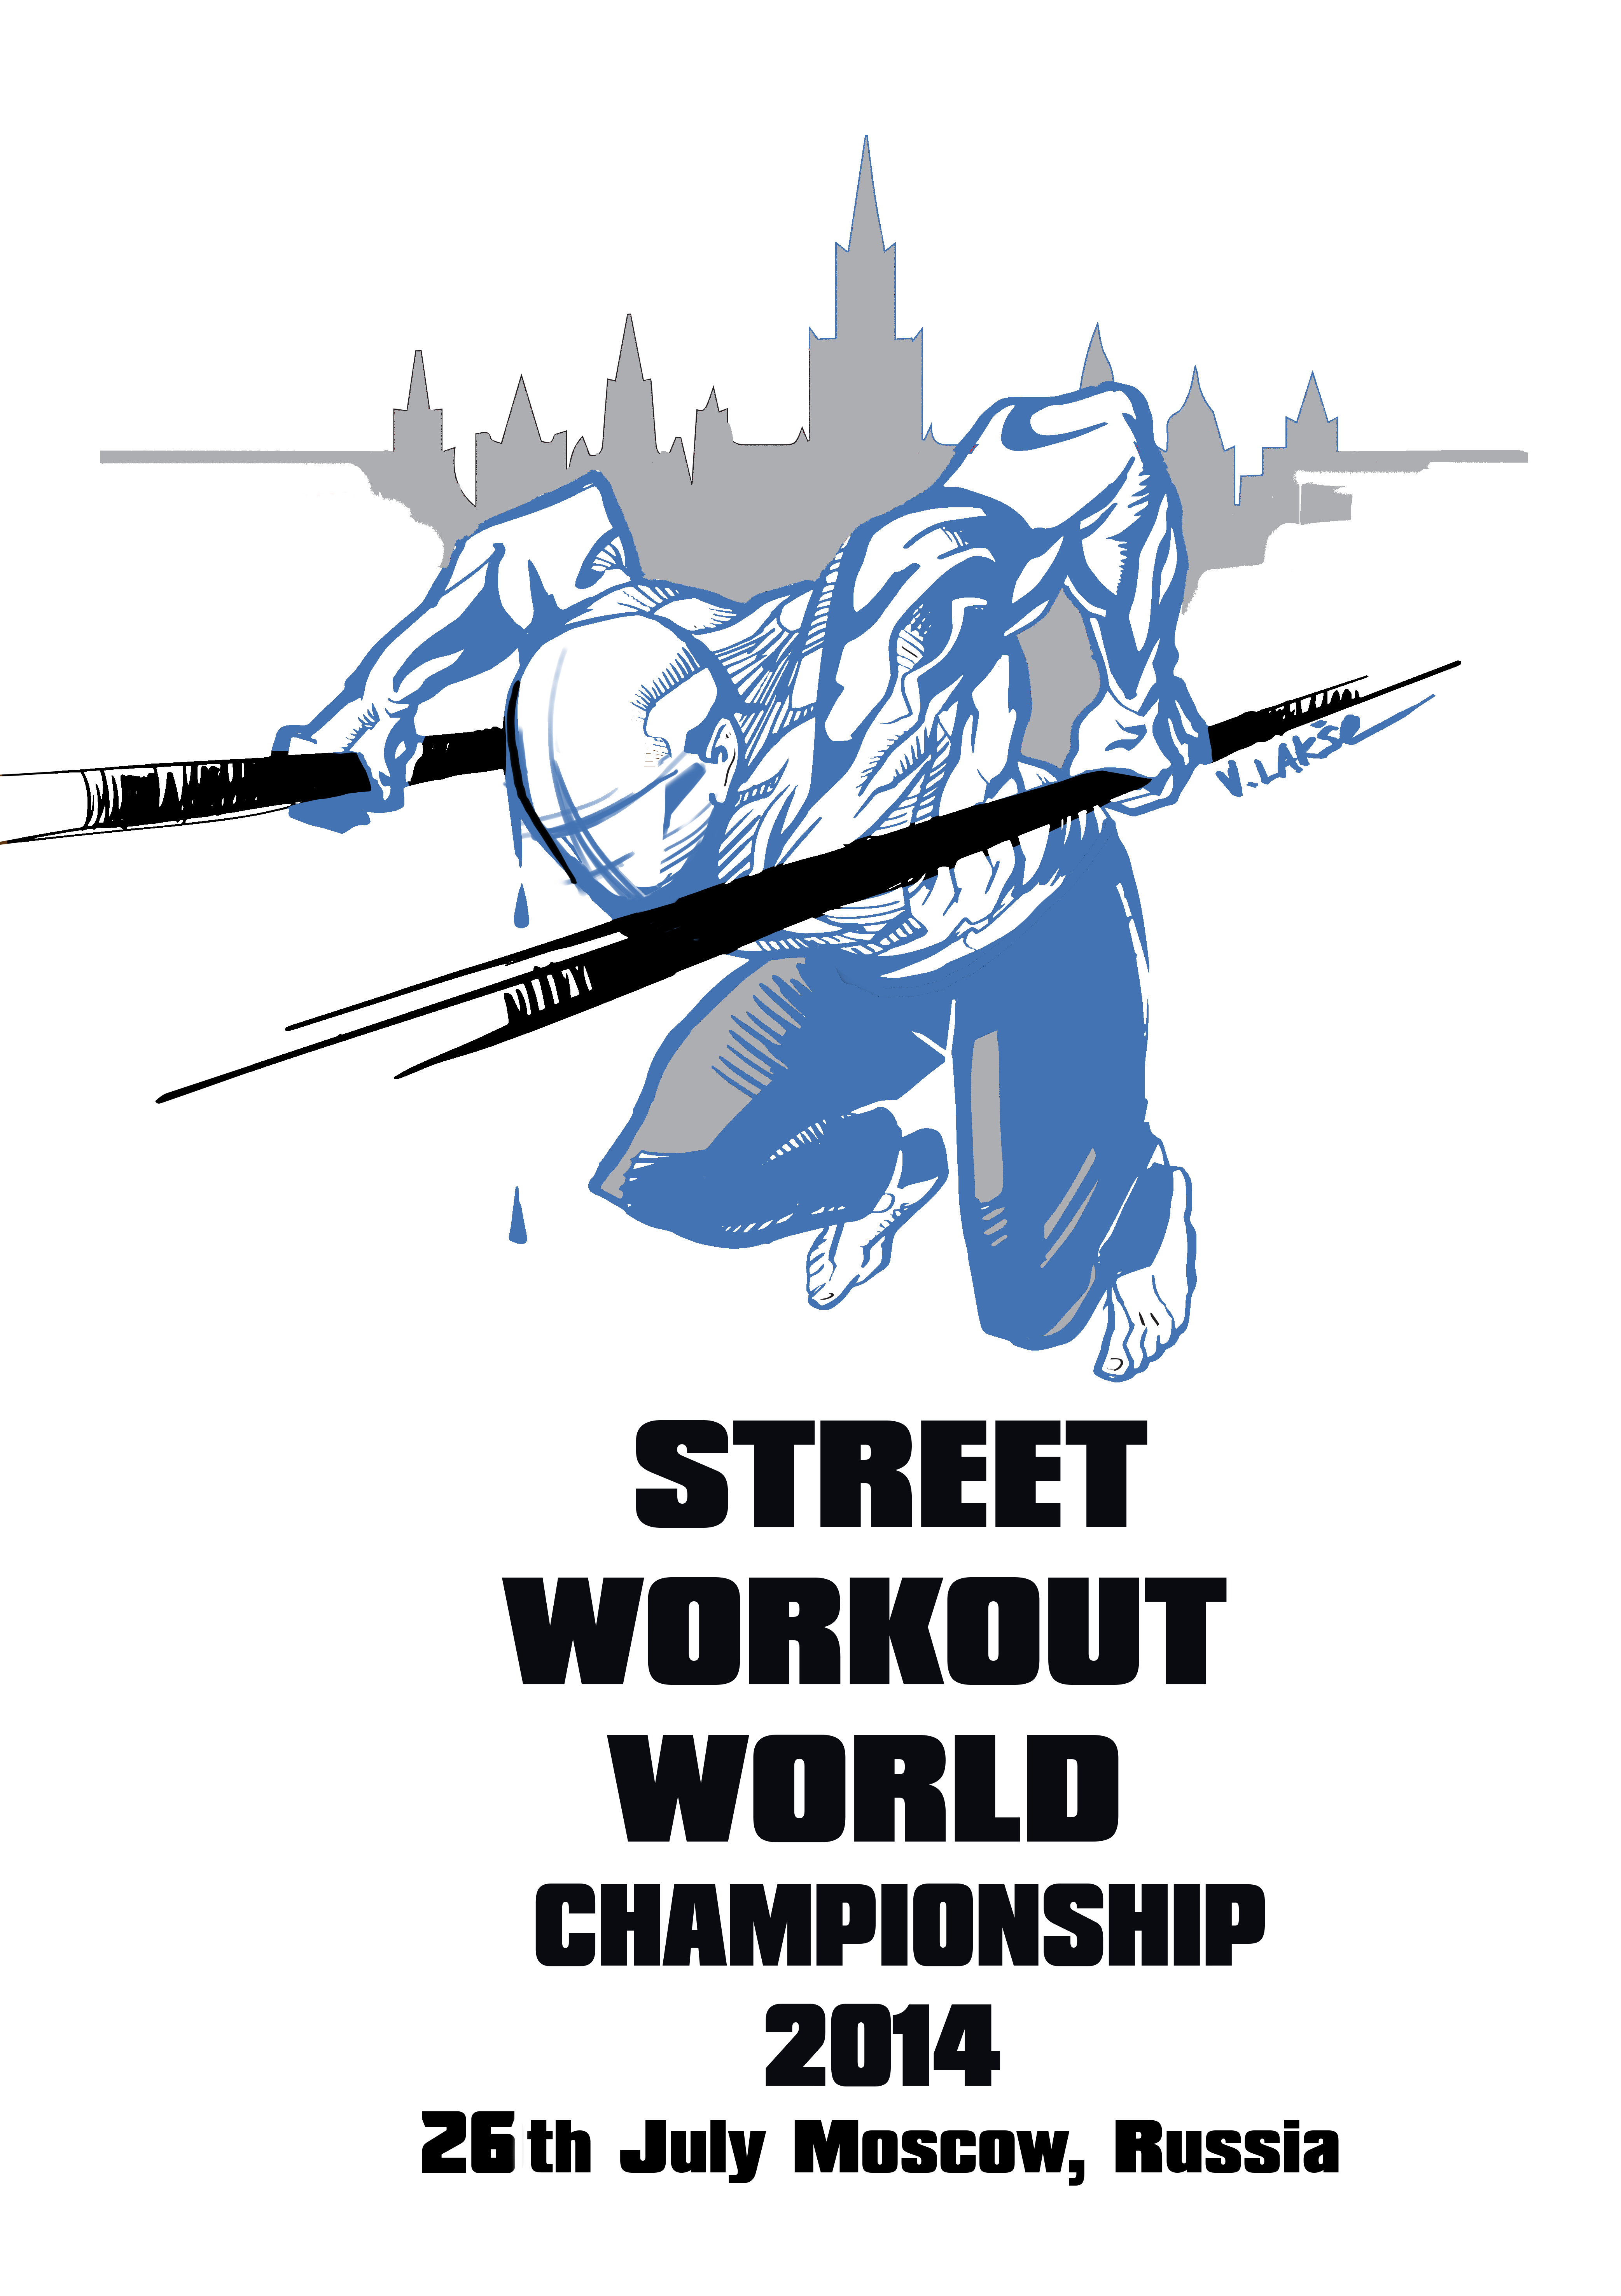 STREET WORKOUT NATIONAL CHAMPIONSHIP 2014 OFFICIAL